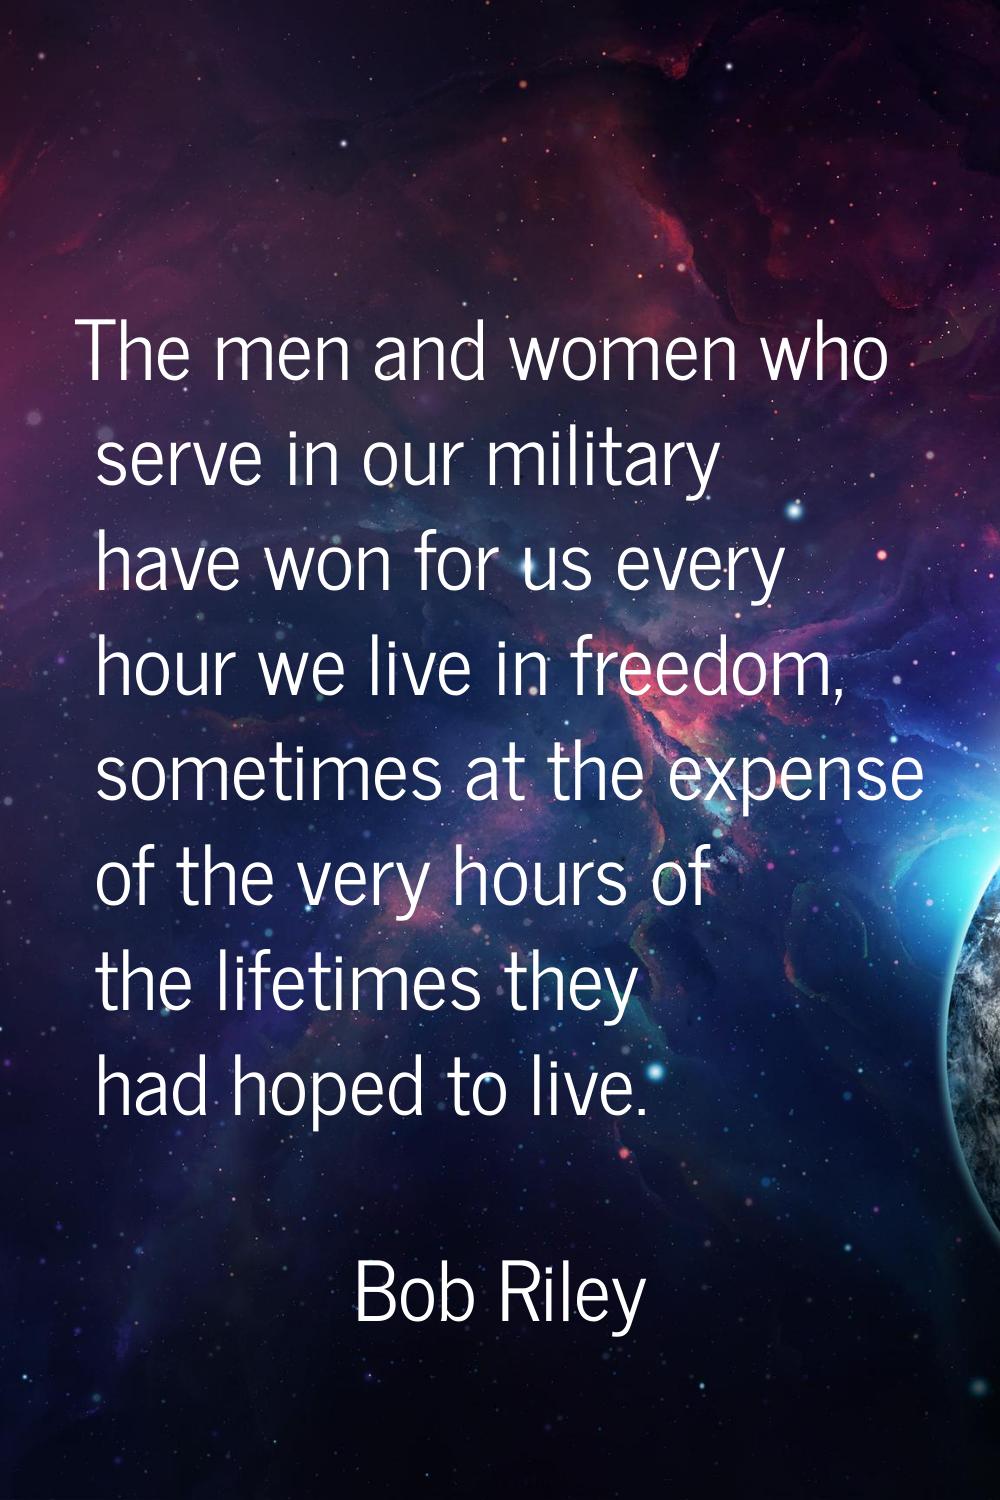 The men and women who serve in our military have won for us every hour we live in freedom, sometime